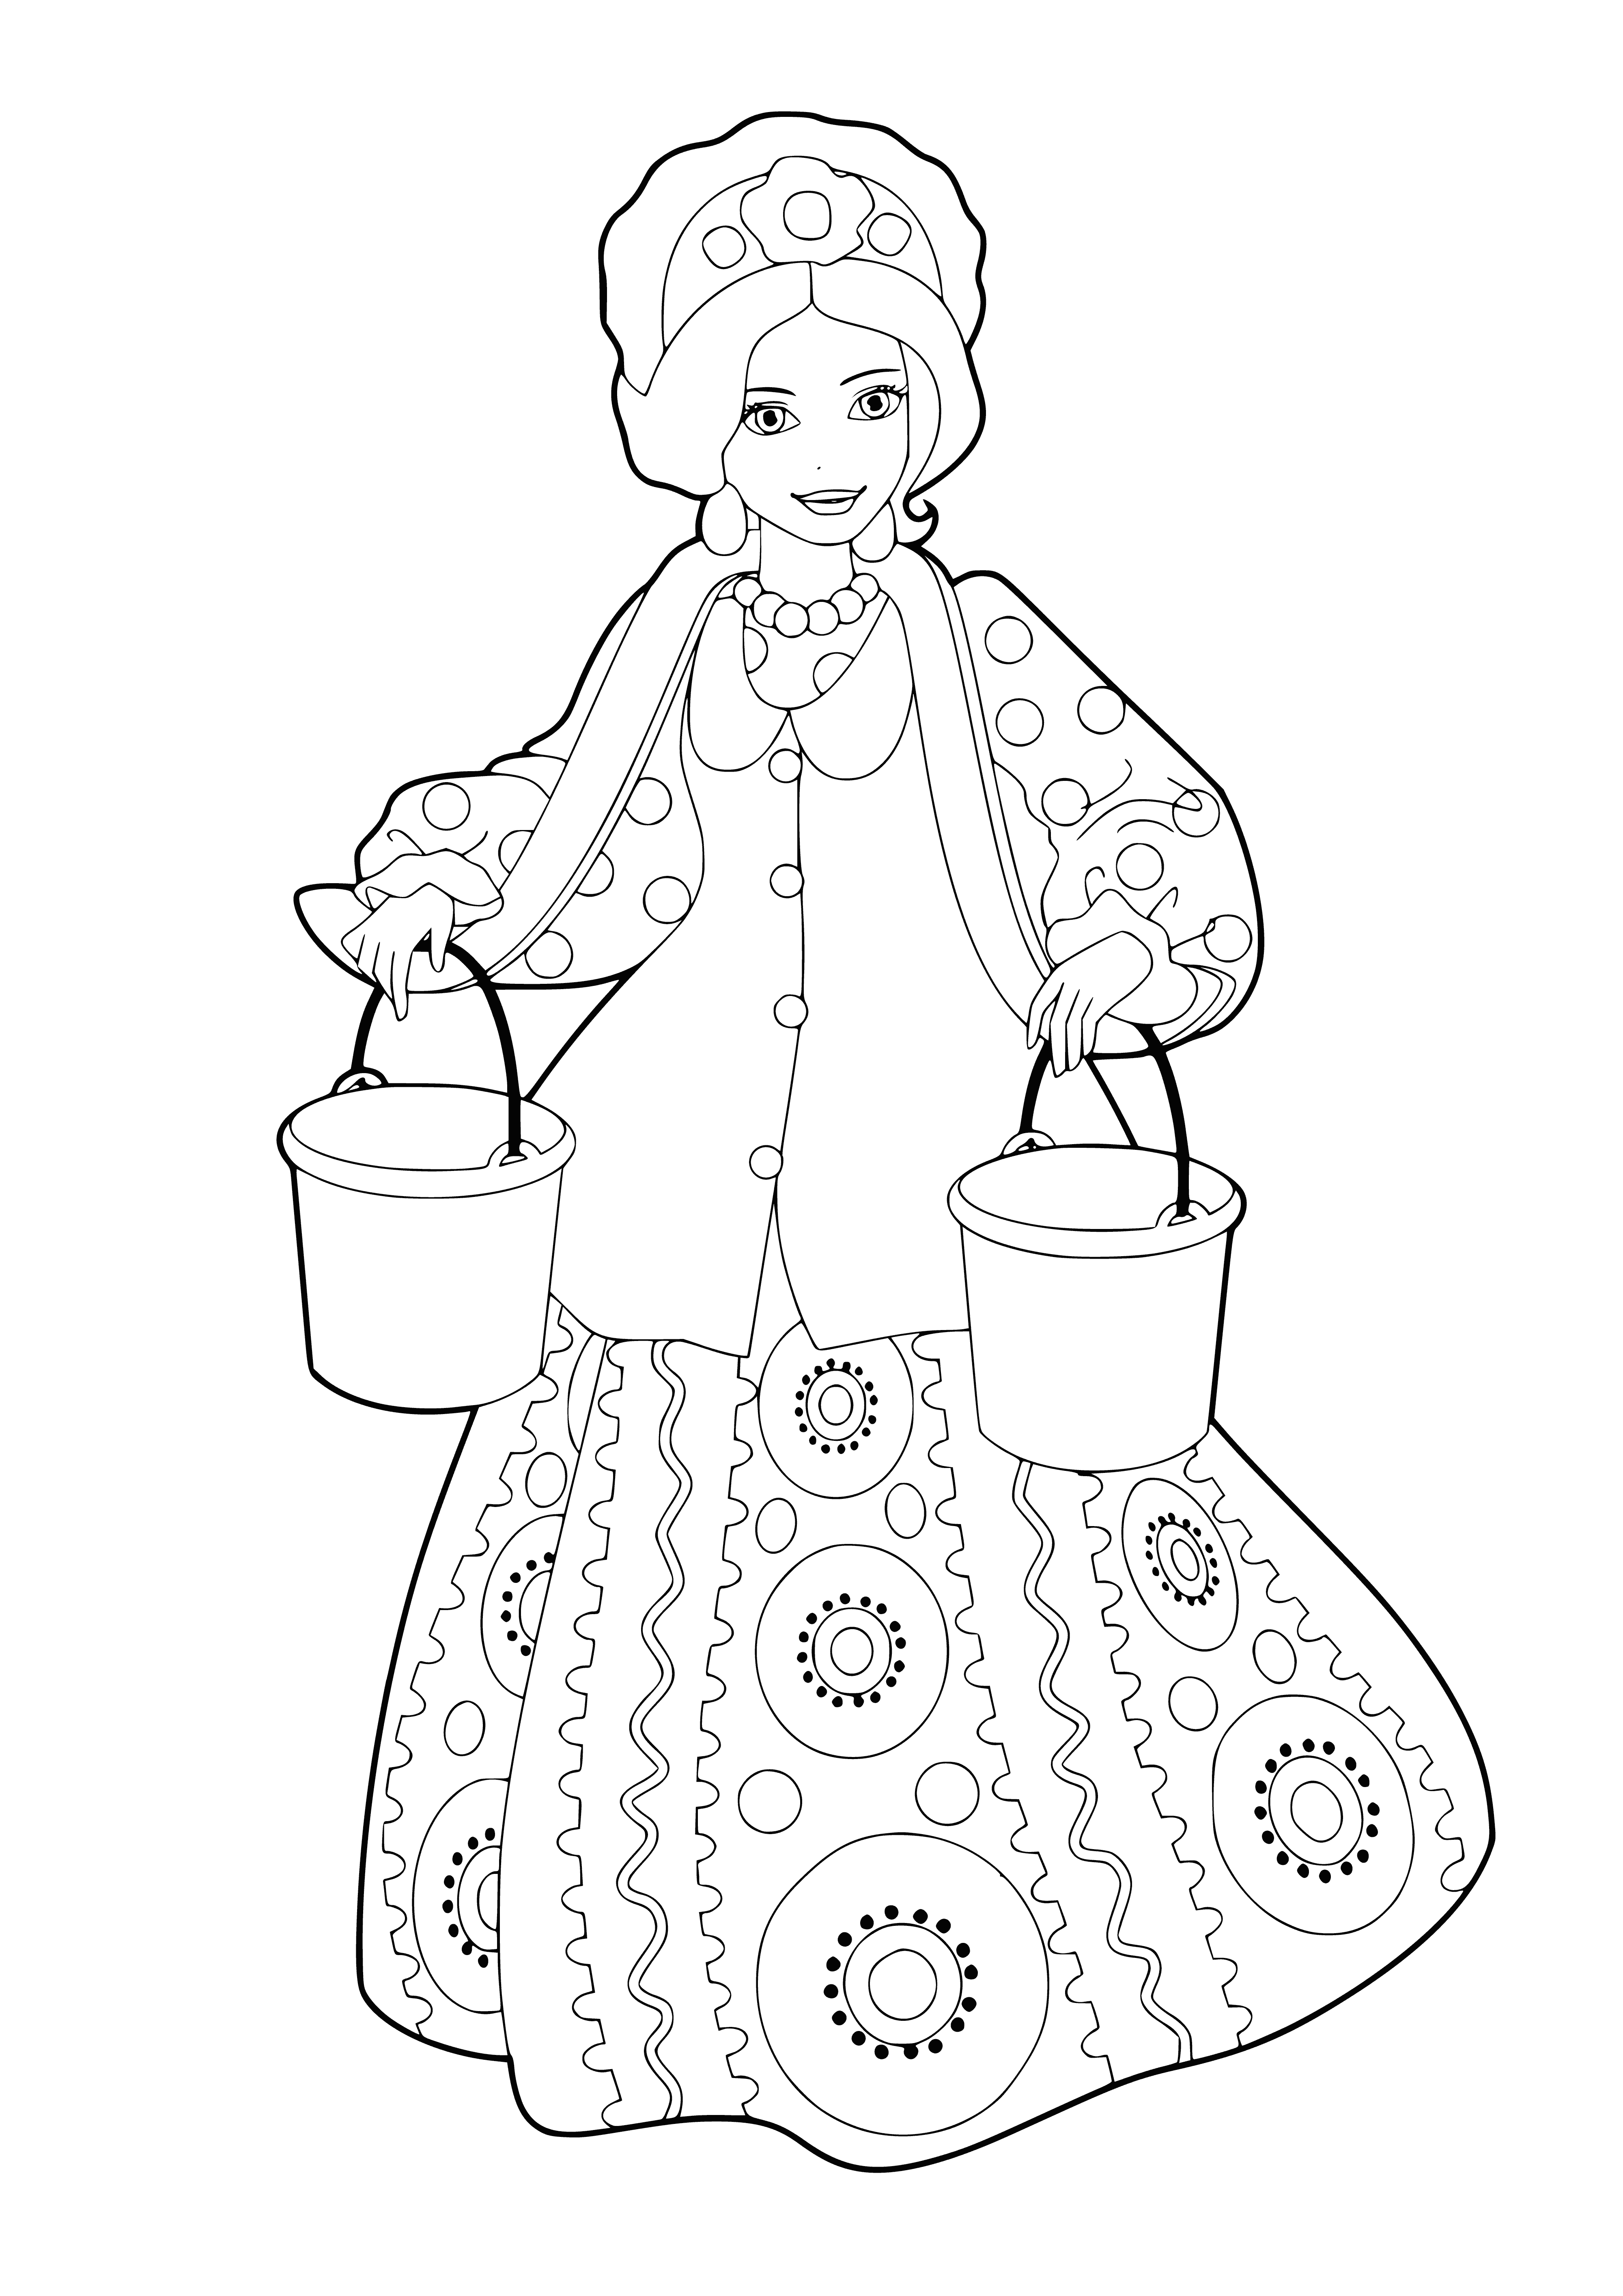 coloring page: 3 gorgeous women shine with beauty. Long hair, colorful dresses, and dark makeup make them look runway-ready.